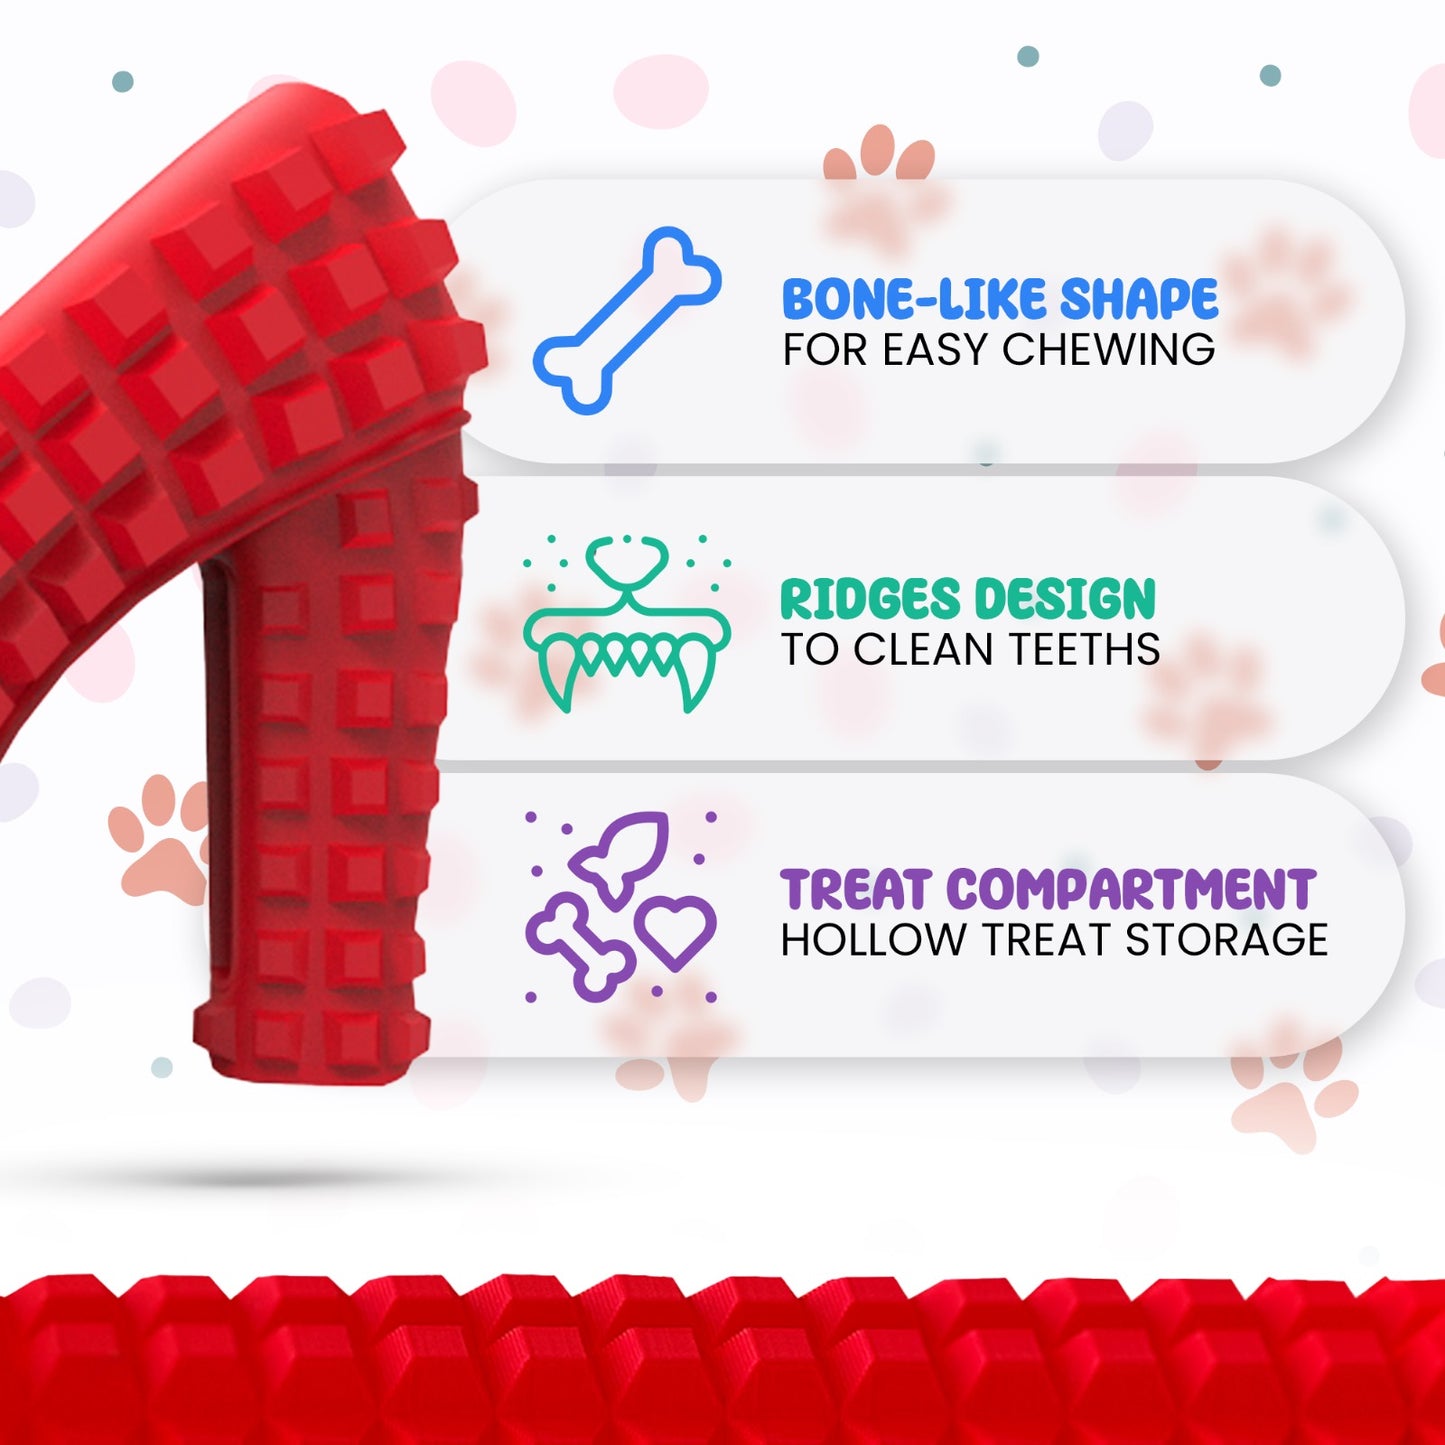 SUPER SHOE - Toothbrush for Small and Medium Dogs - Rubber Natural